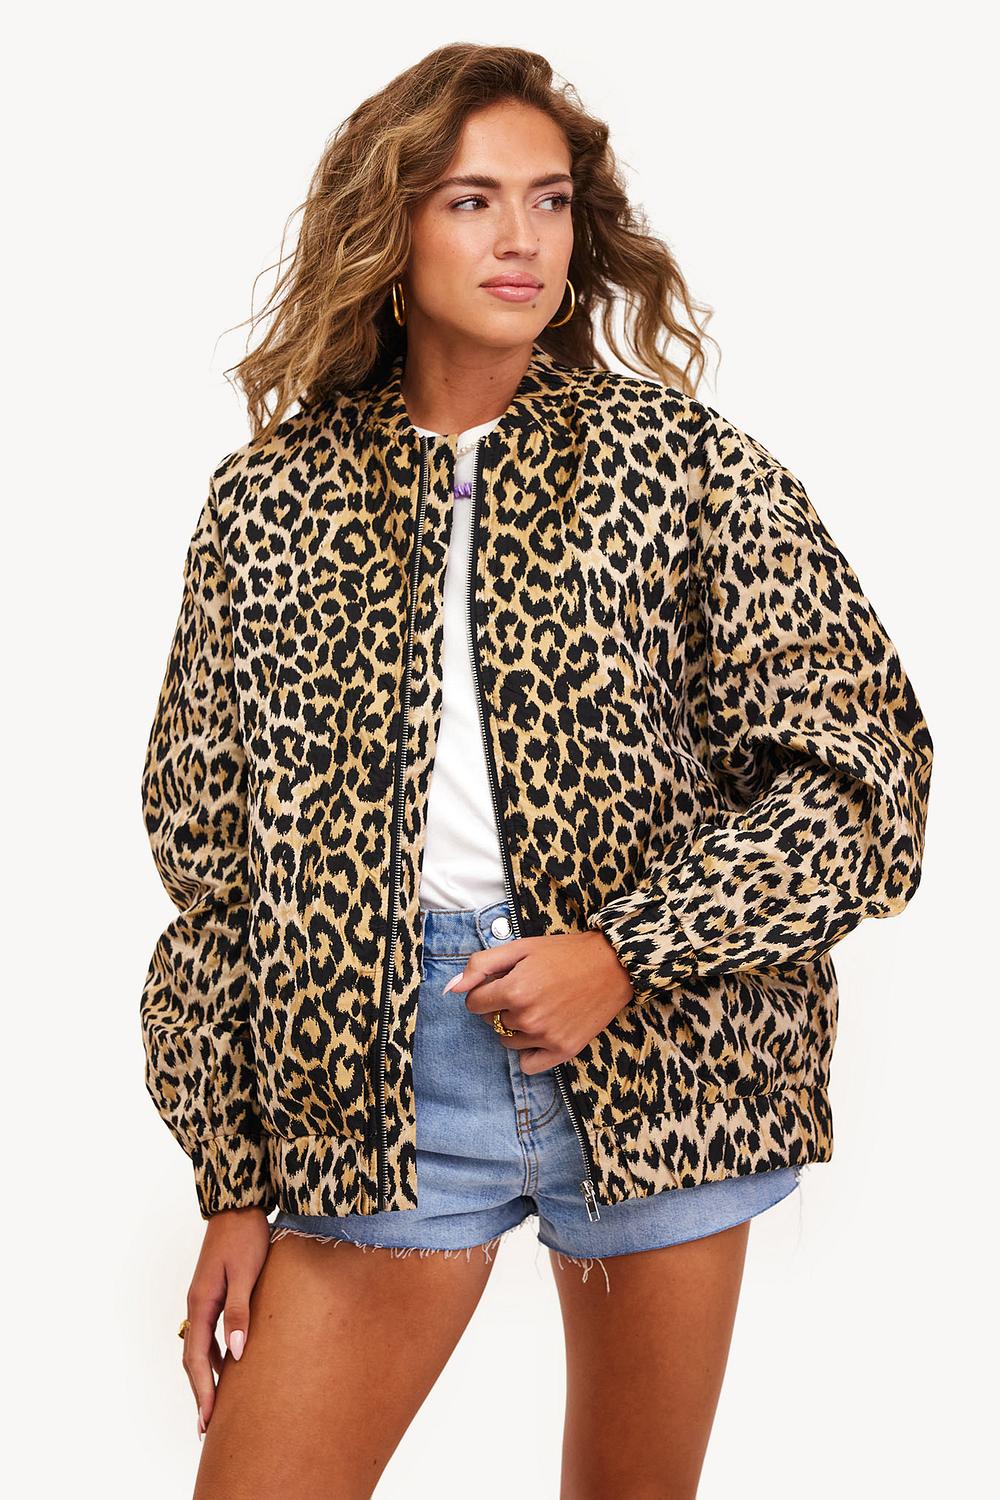 Brown bomber jacket with leopard print